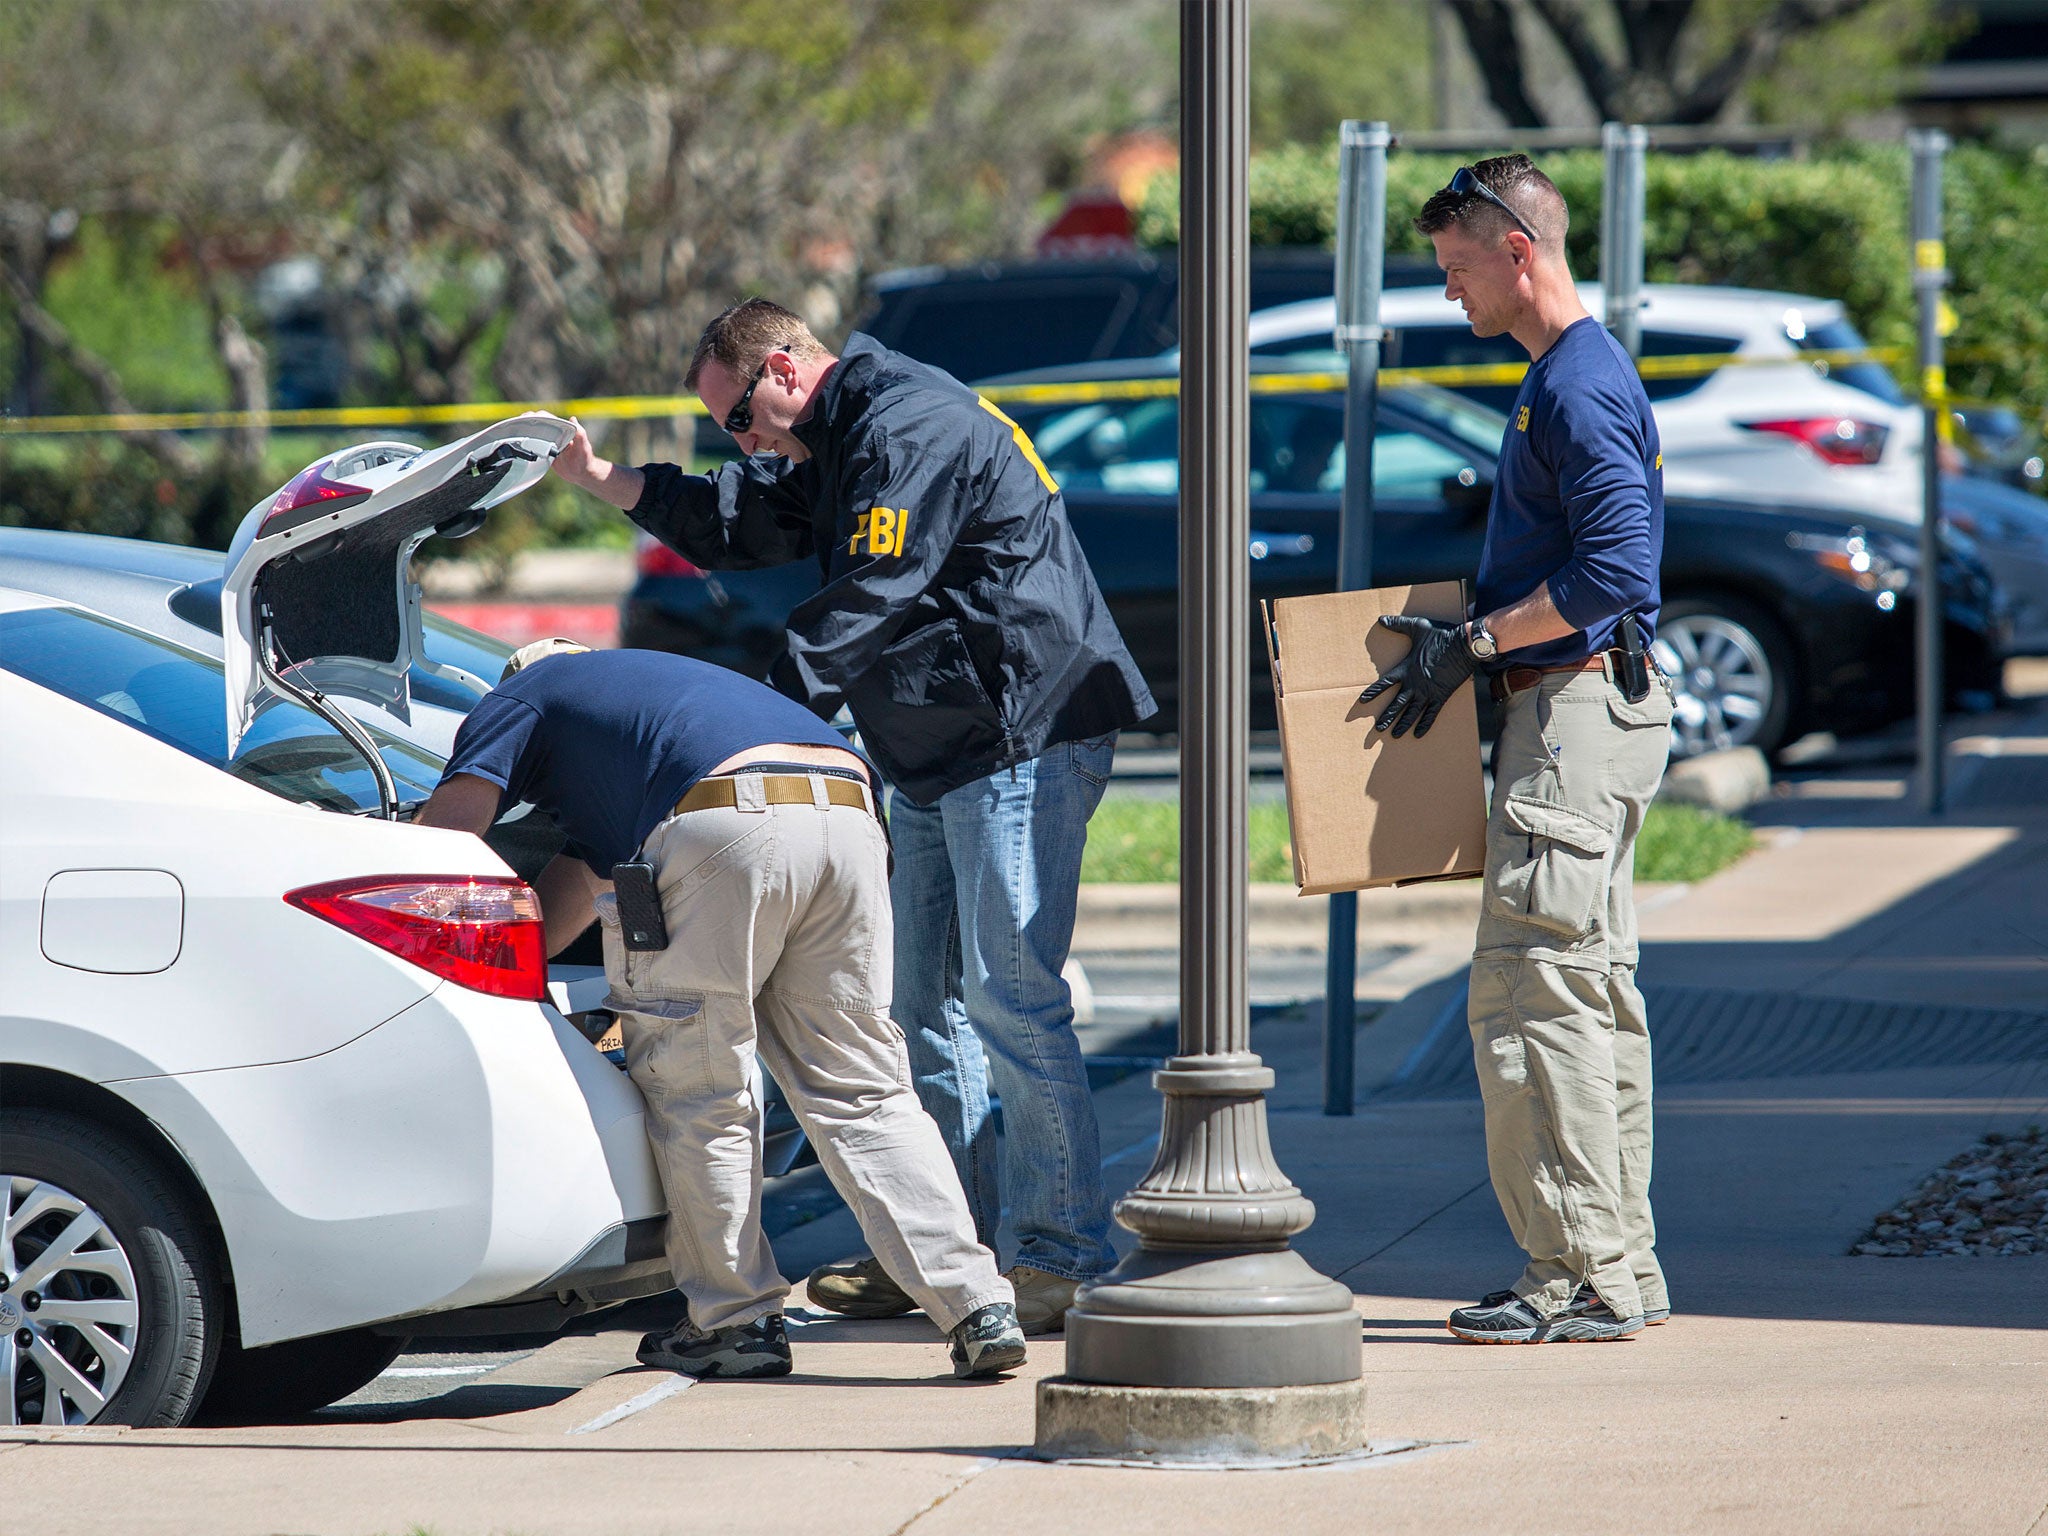 FBI agents are seen carrying items out in paper bags and boxes at a FedEx shop in Austin, Texas